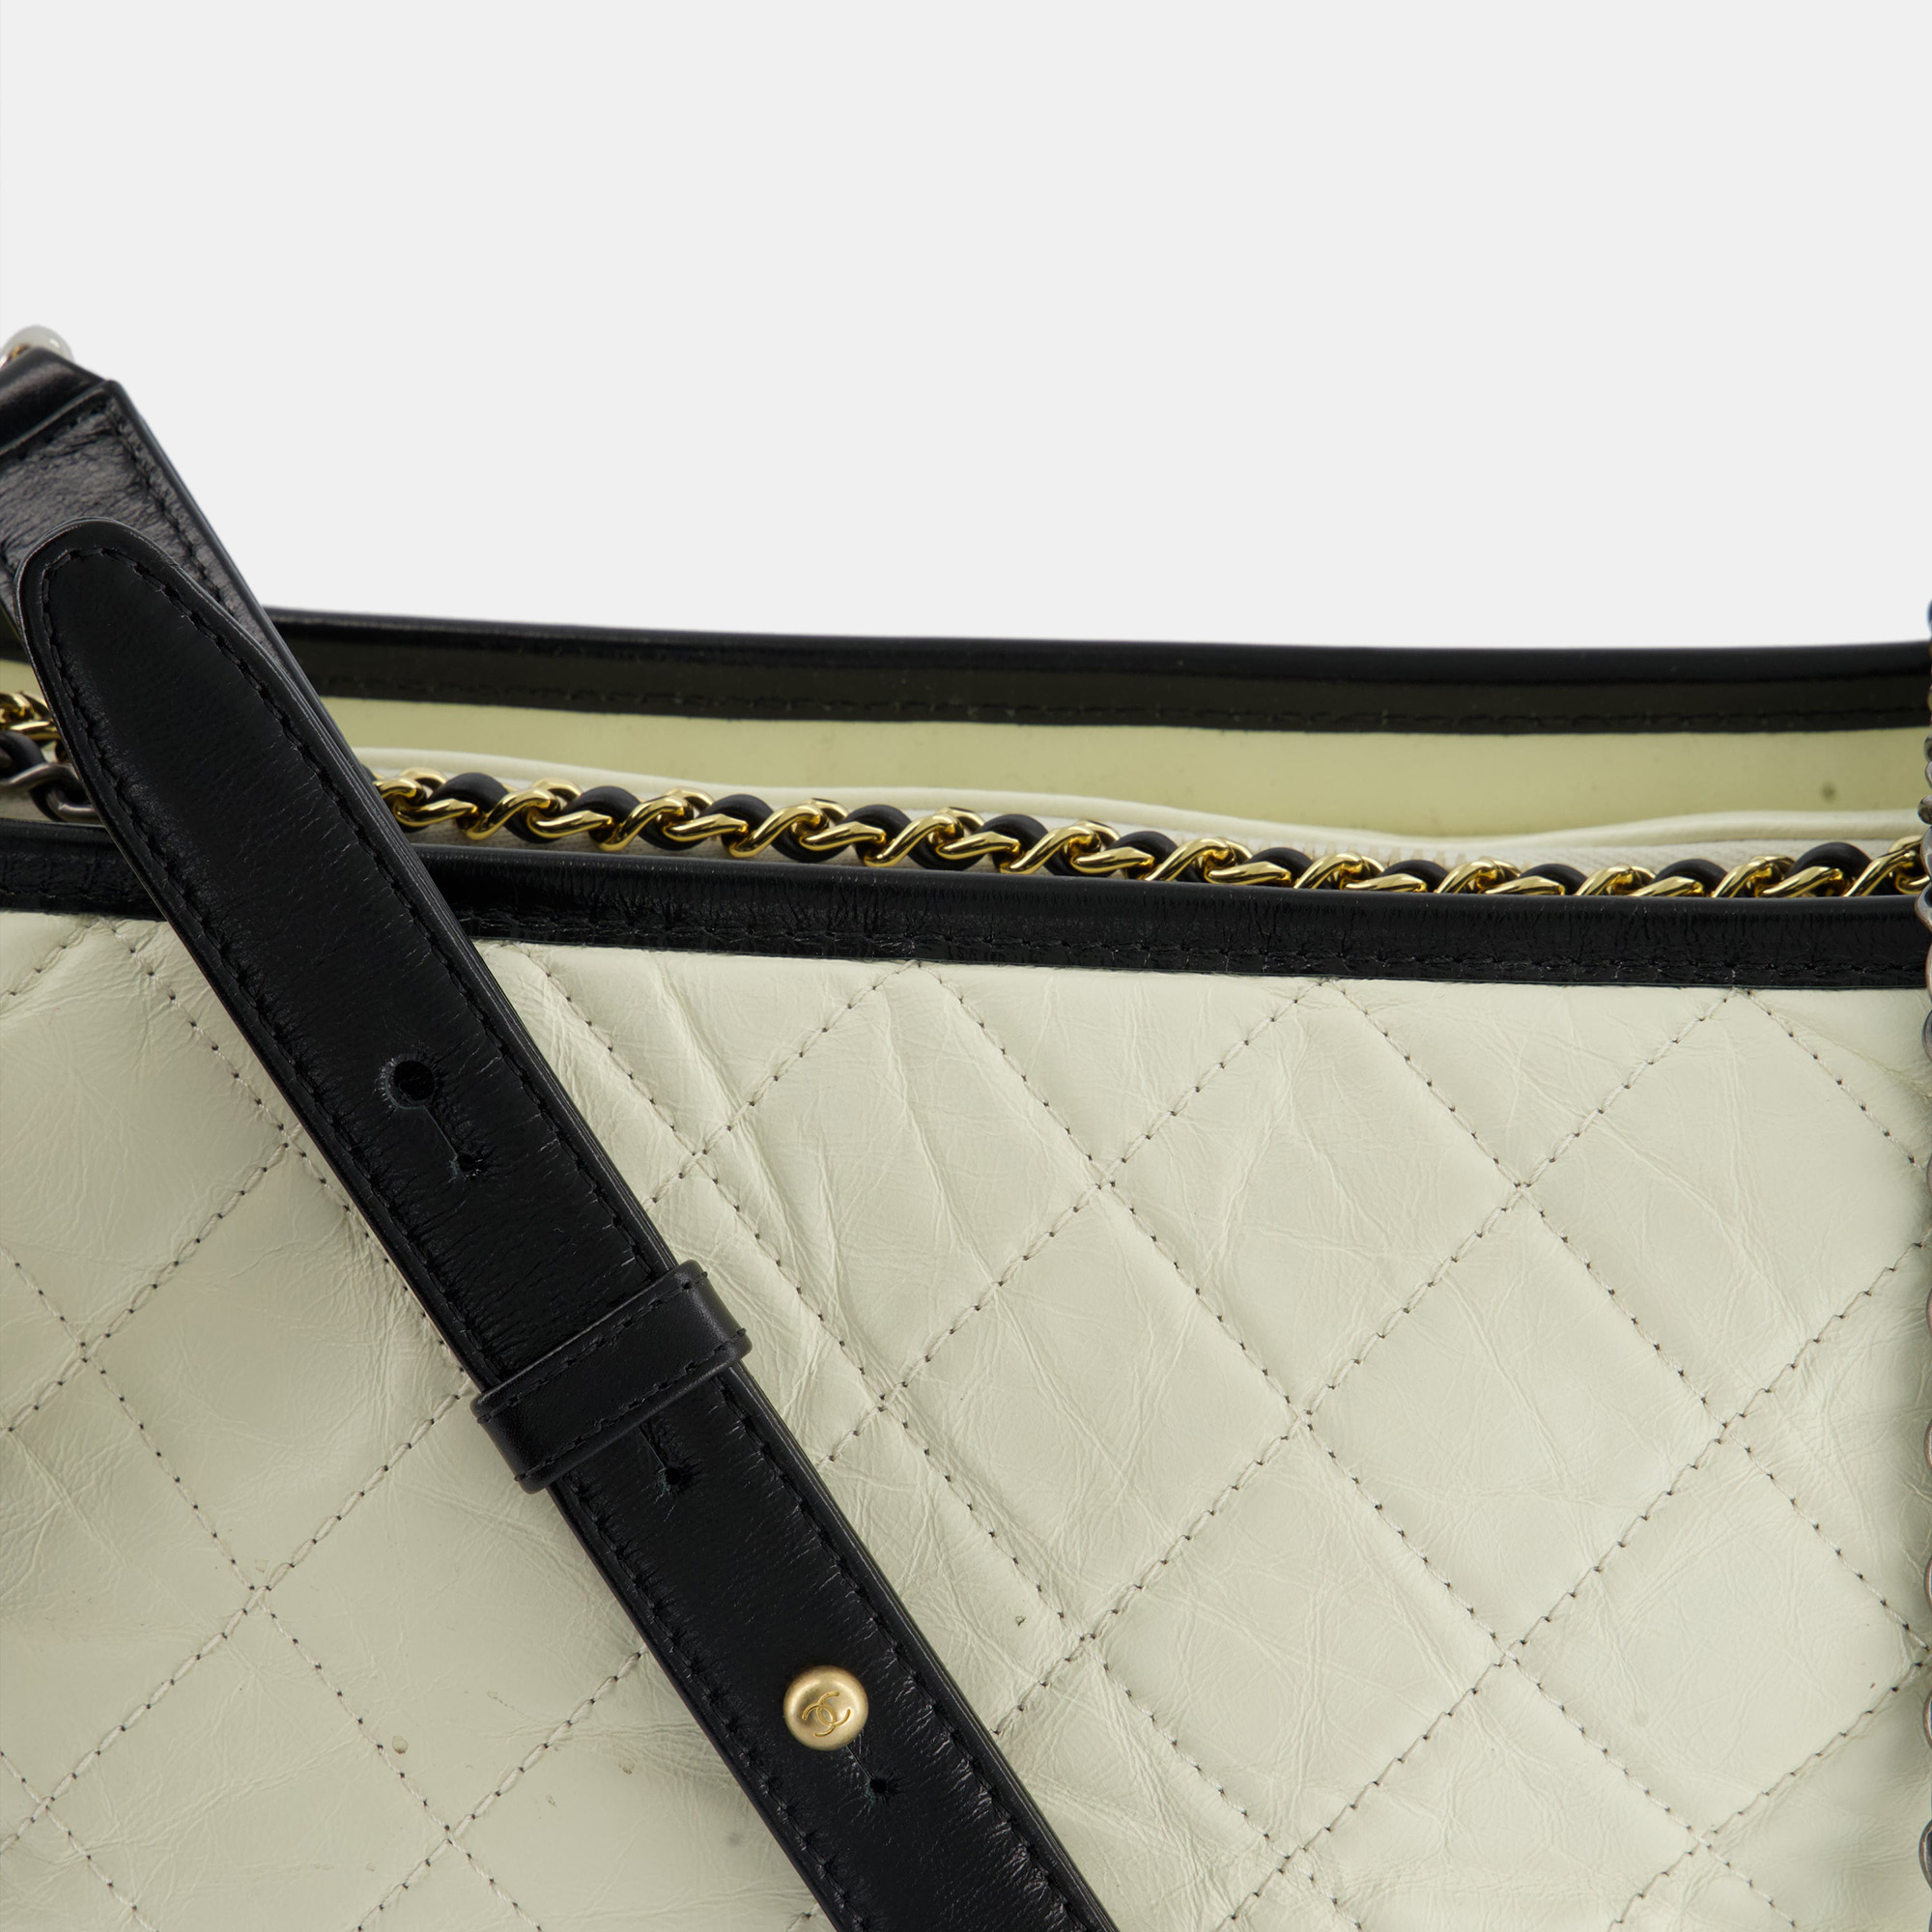 Chanel White And Black Medium Gabrielle Bag In Aged Calfskin Leather With Mixed Hardware